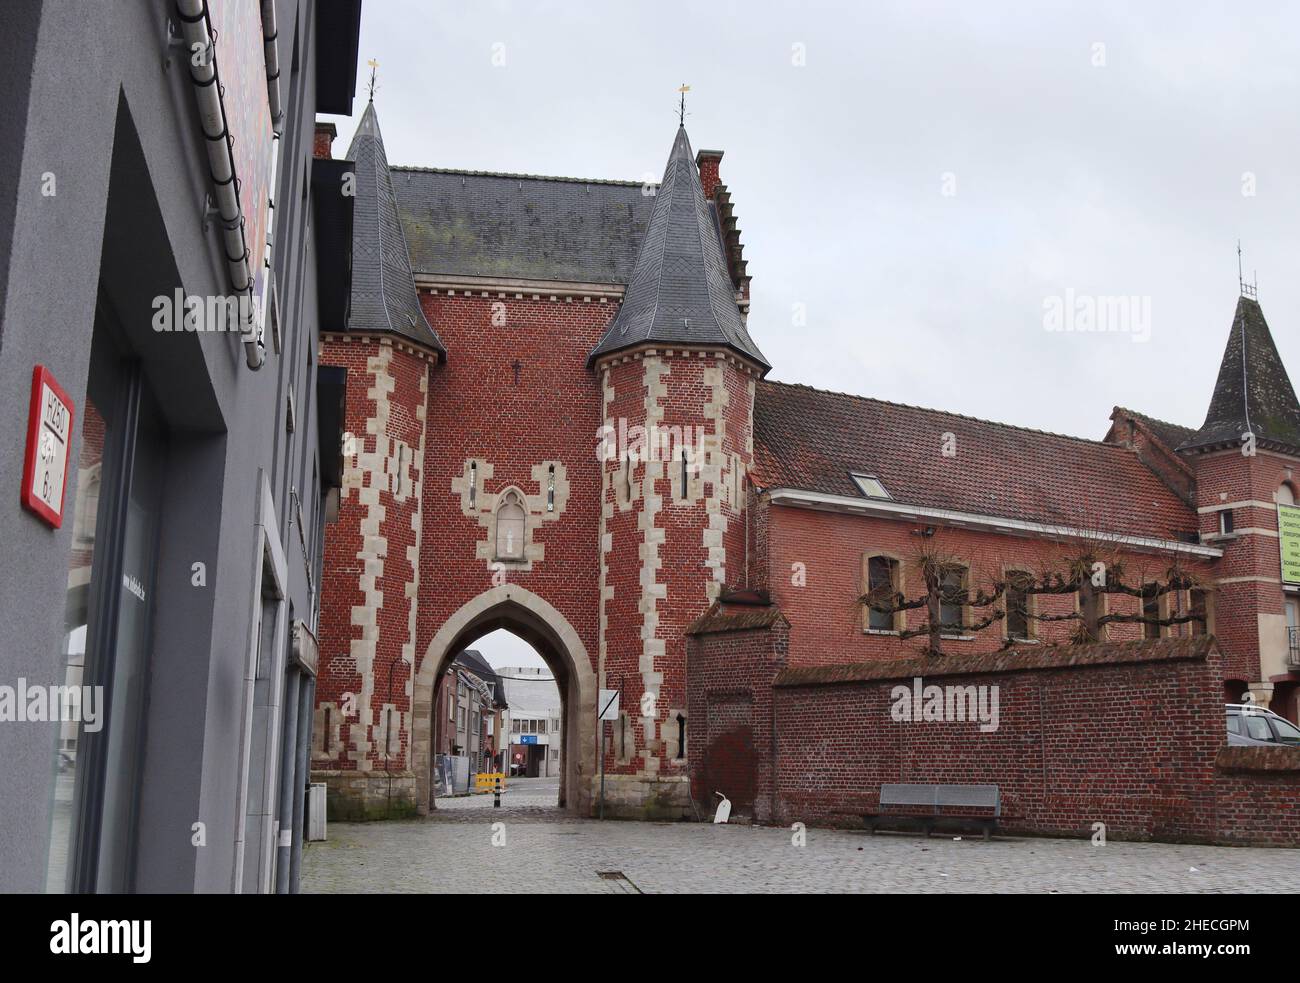 NINOVE, BELGIUM, 5 JANUARY 2022: View of the 'Koepoort' in Ninove, East Flanders, Belgium. The 15th century building is the only remaining city gate h Stock Photo